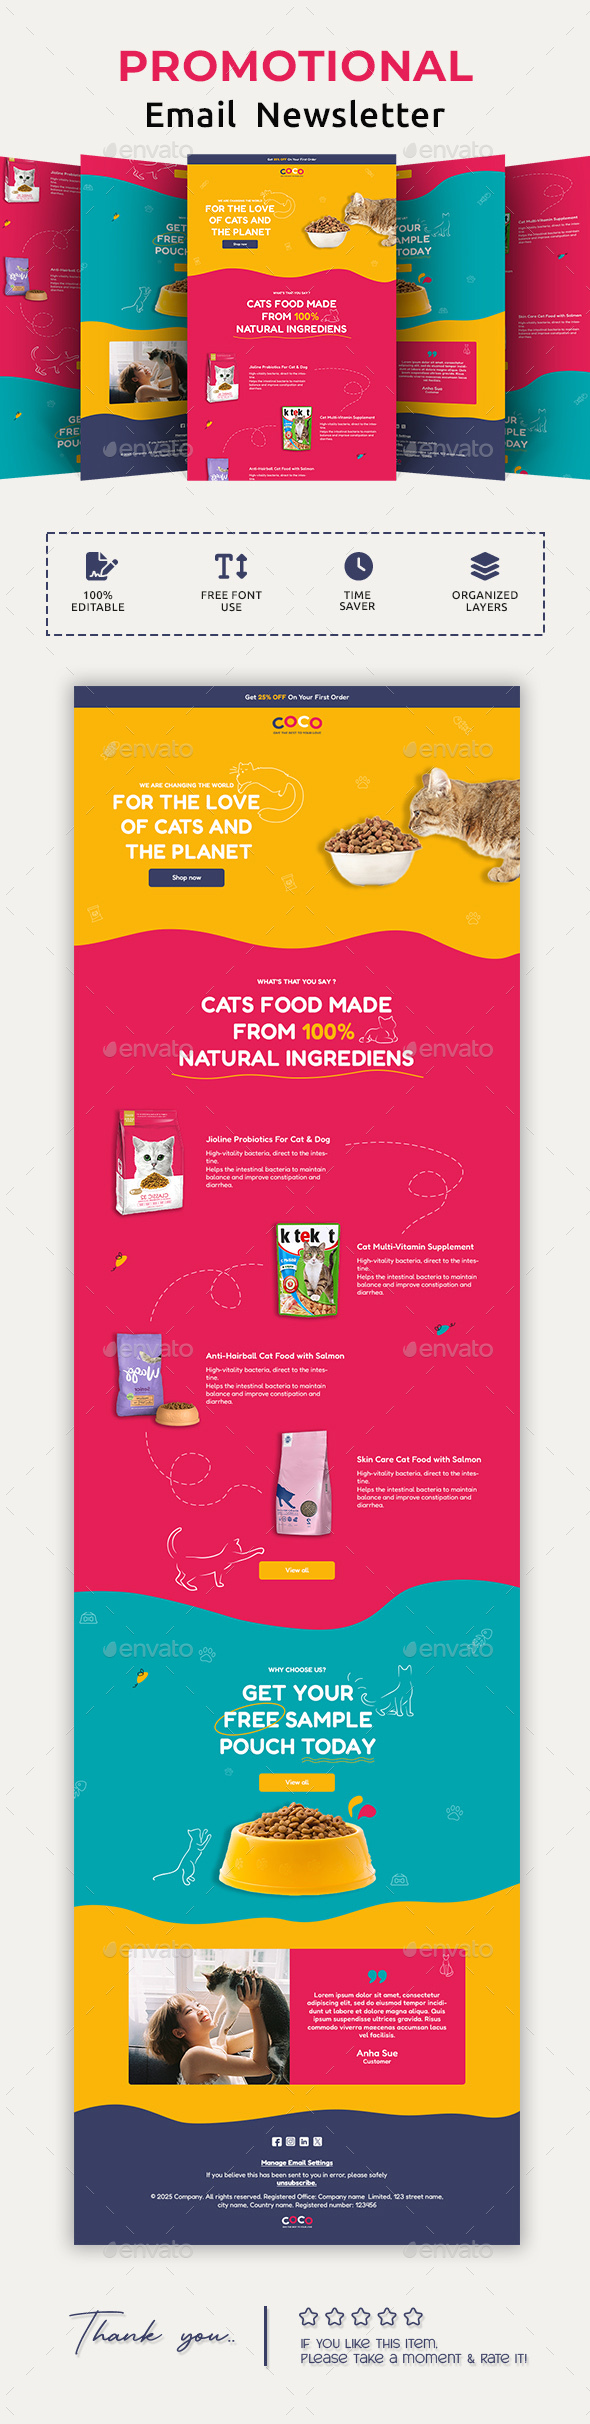 [DOWNLOAD]Pet Shop Email Newsletter PSD Template